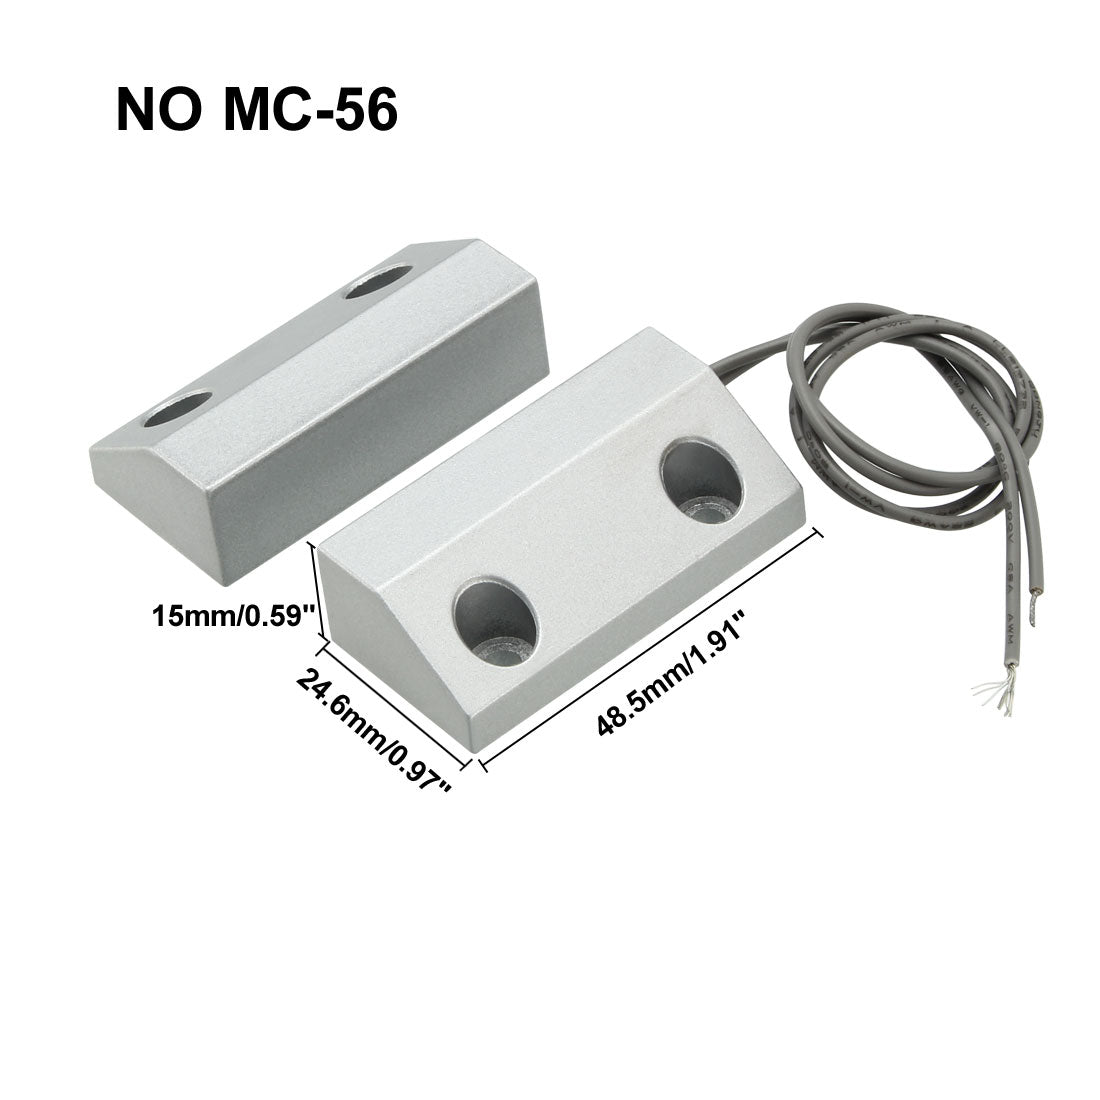 uxcell Uxcell MC-56 NO Alarm Security Rolling Gate Garage Door Contact Magnetic Reed Switch Silver Gray